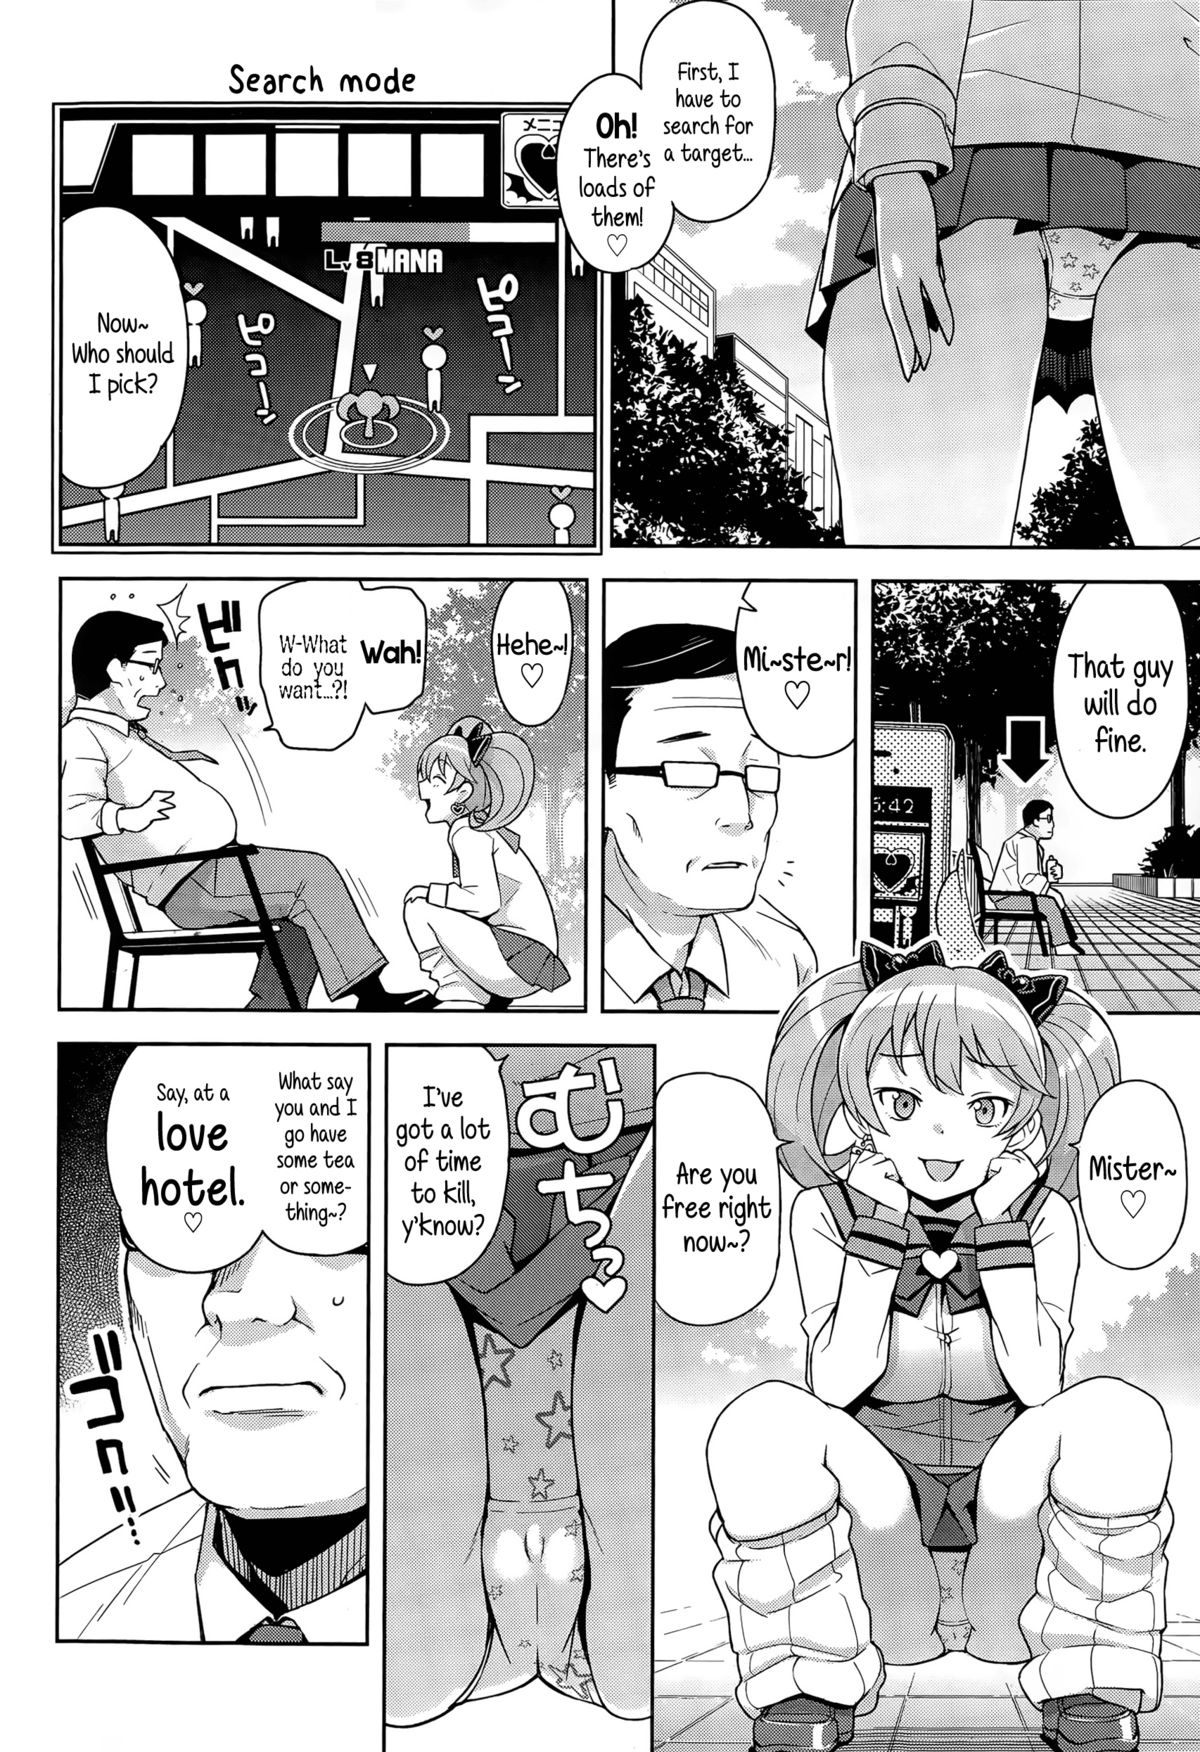 [Tamagoro] Hametomo Collection Ch. 1-2 | FuckBuddy Collection Ch. 1-2 [English] {5 a.m.} page 6 full